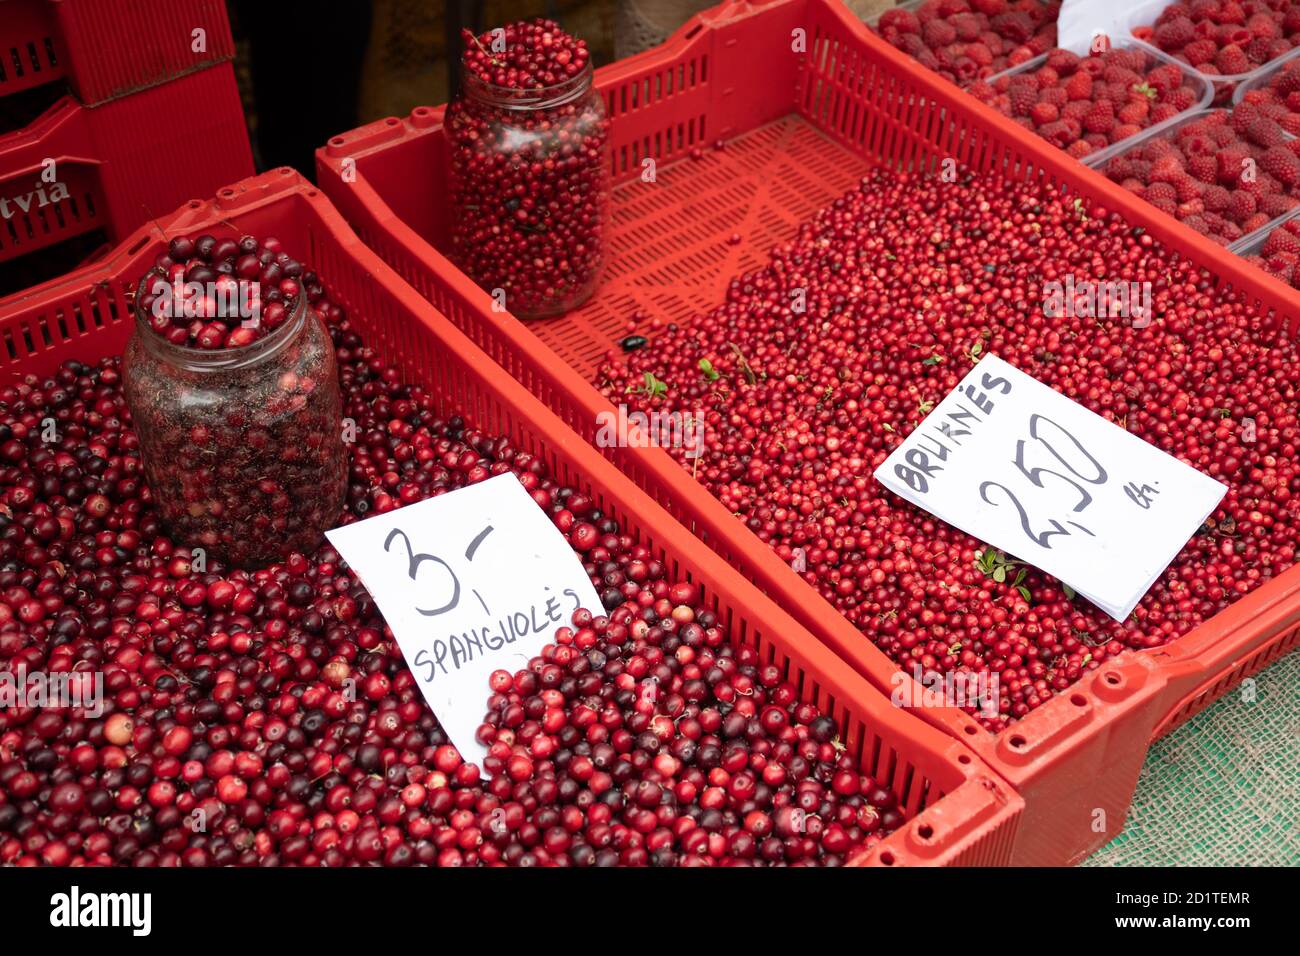 Red fresh healthy cranberries and lingonberries in a street food market ready to sell and eat, with glass jars Stock Photo